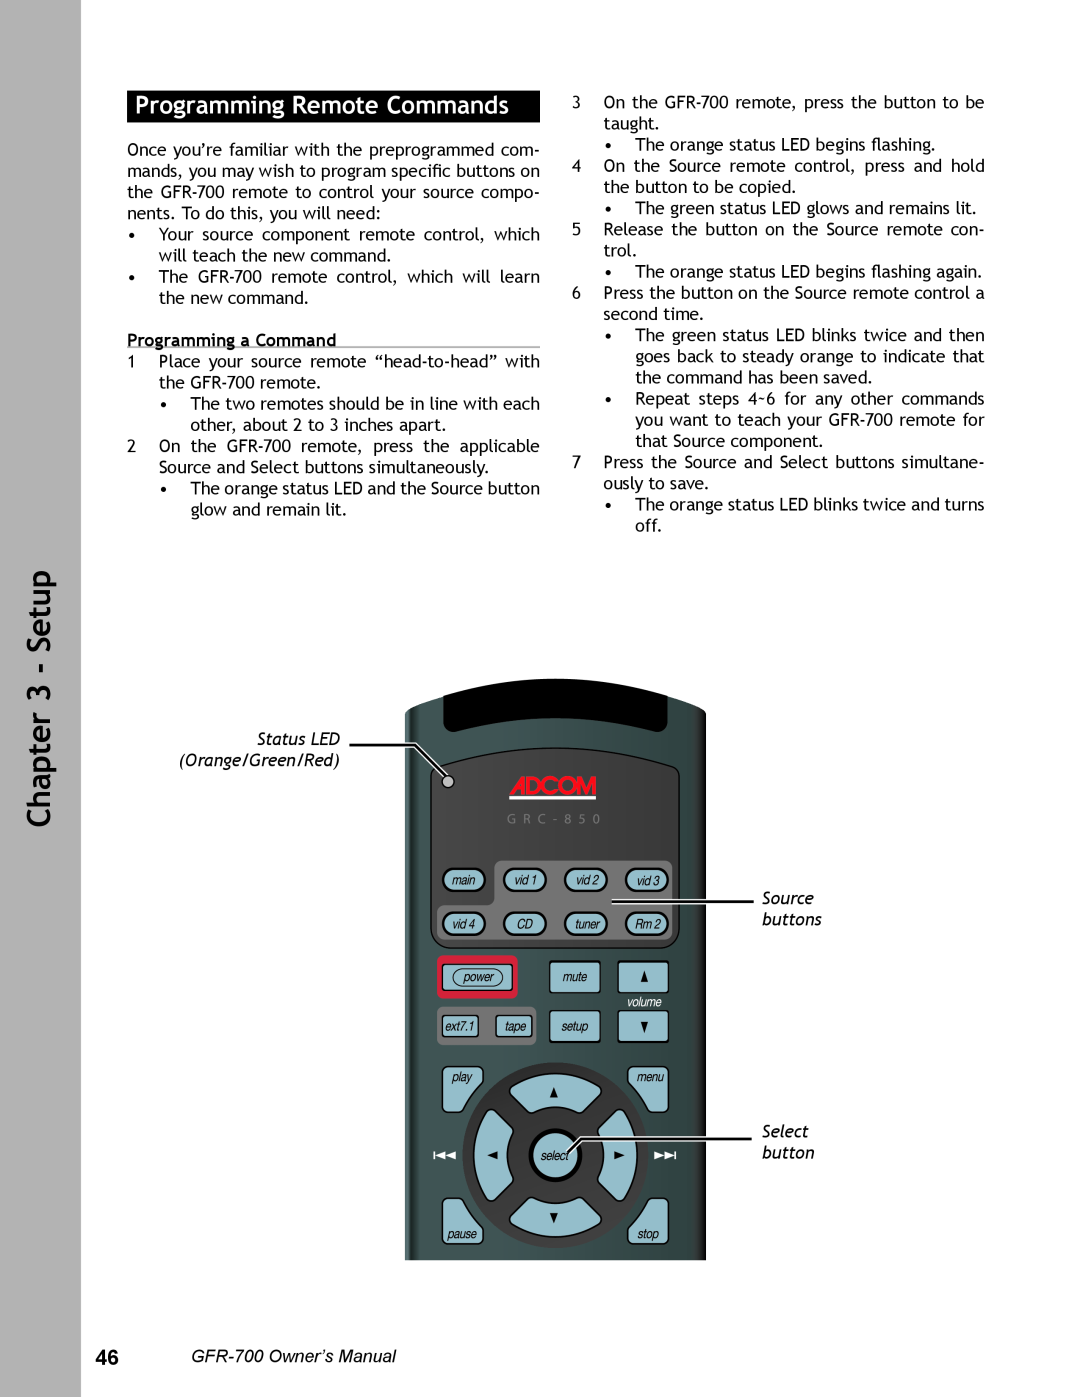 Adcom GFR-700 Programming Remote Commands, Programming a Command, Status LED Orange/Green/Red Source buttons, Setup 